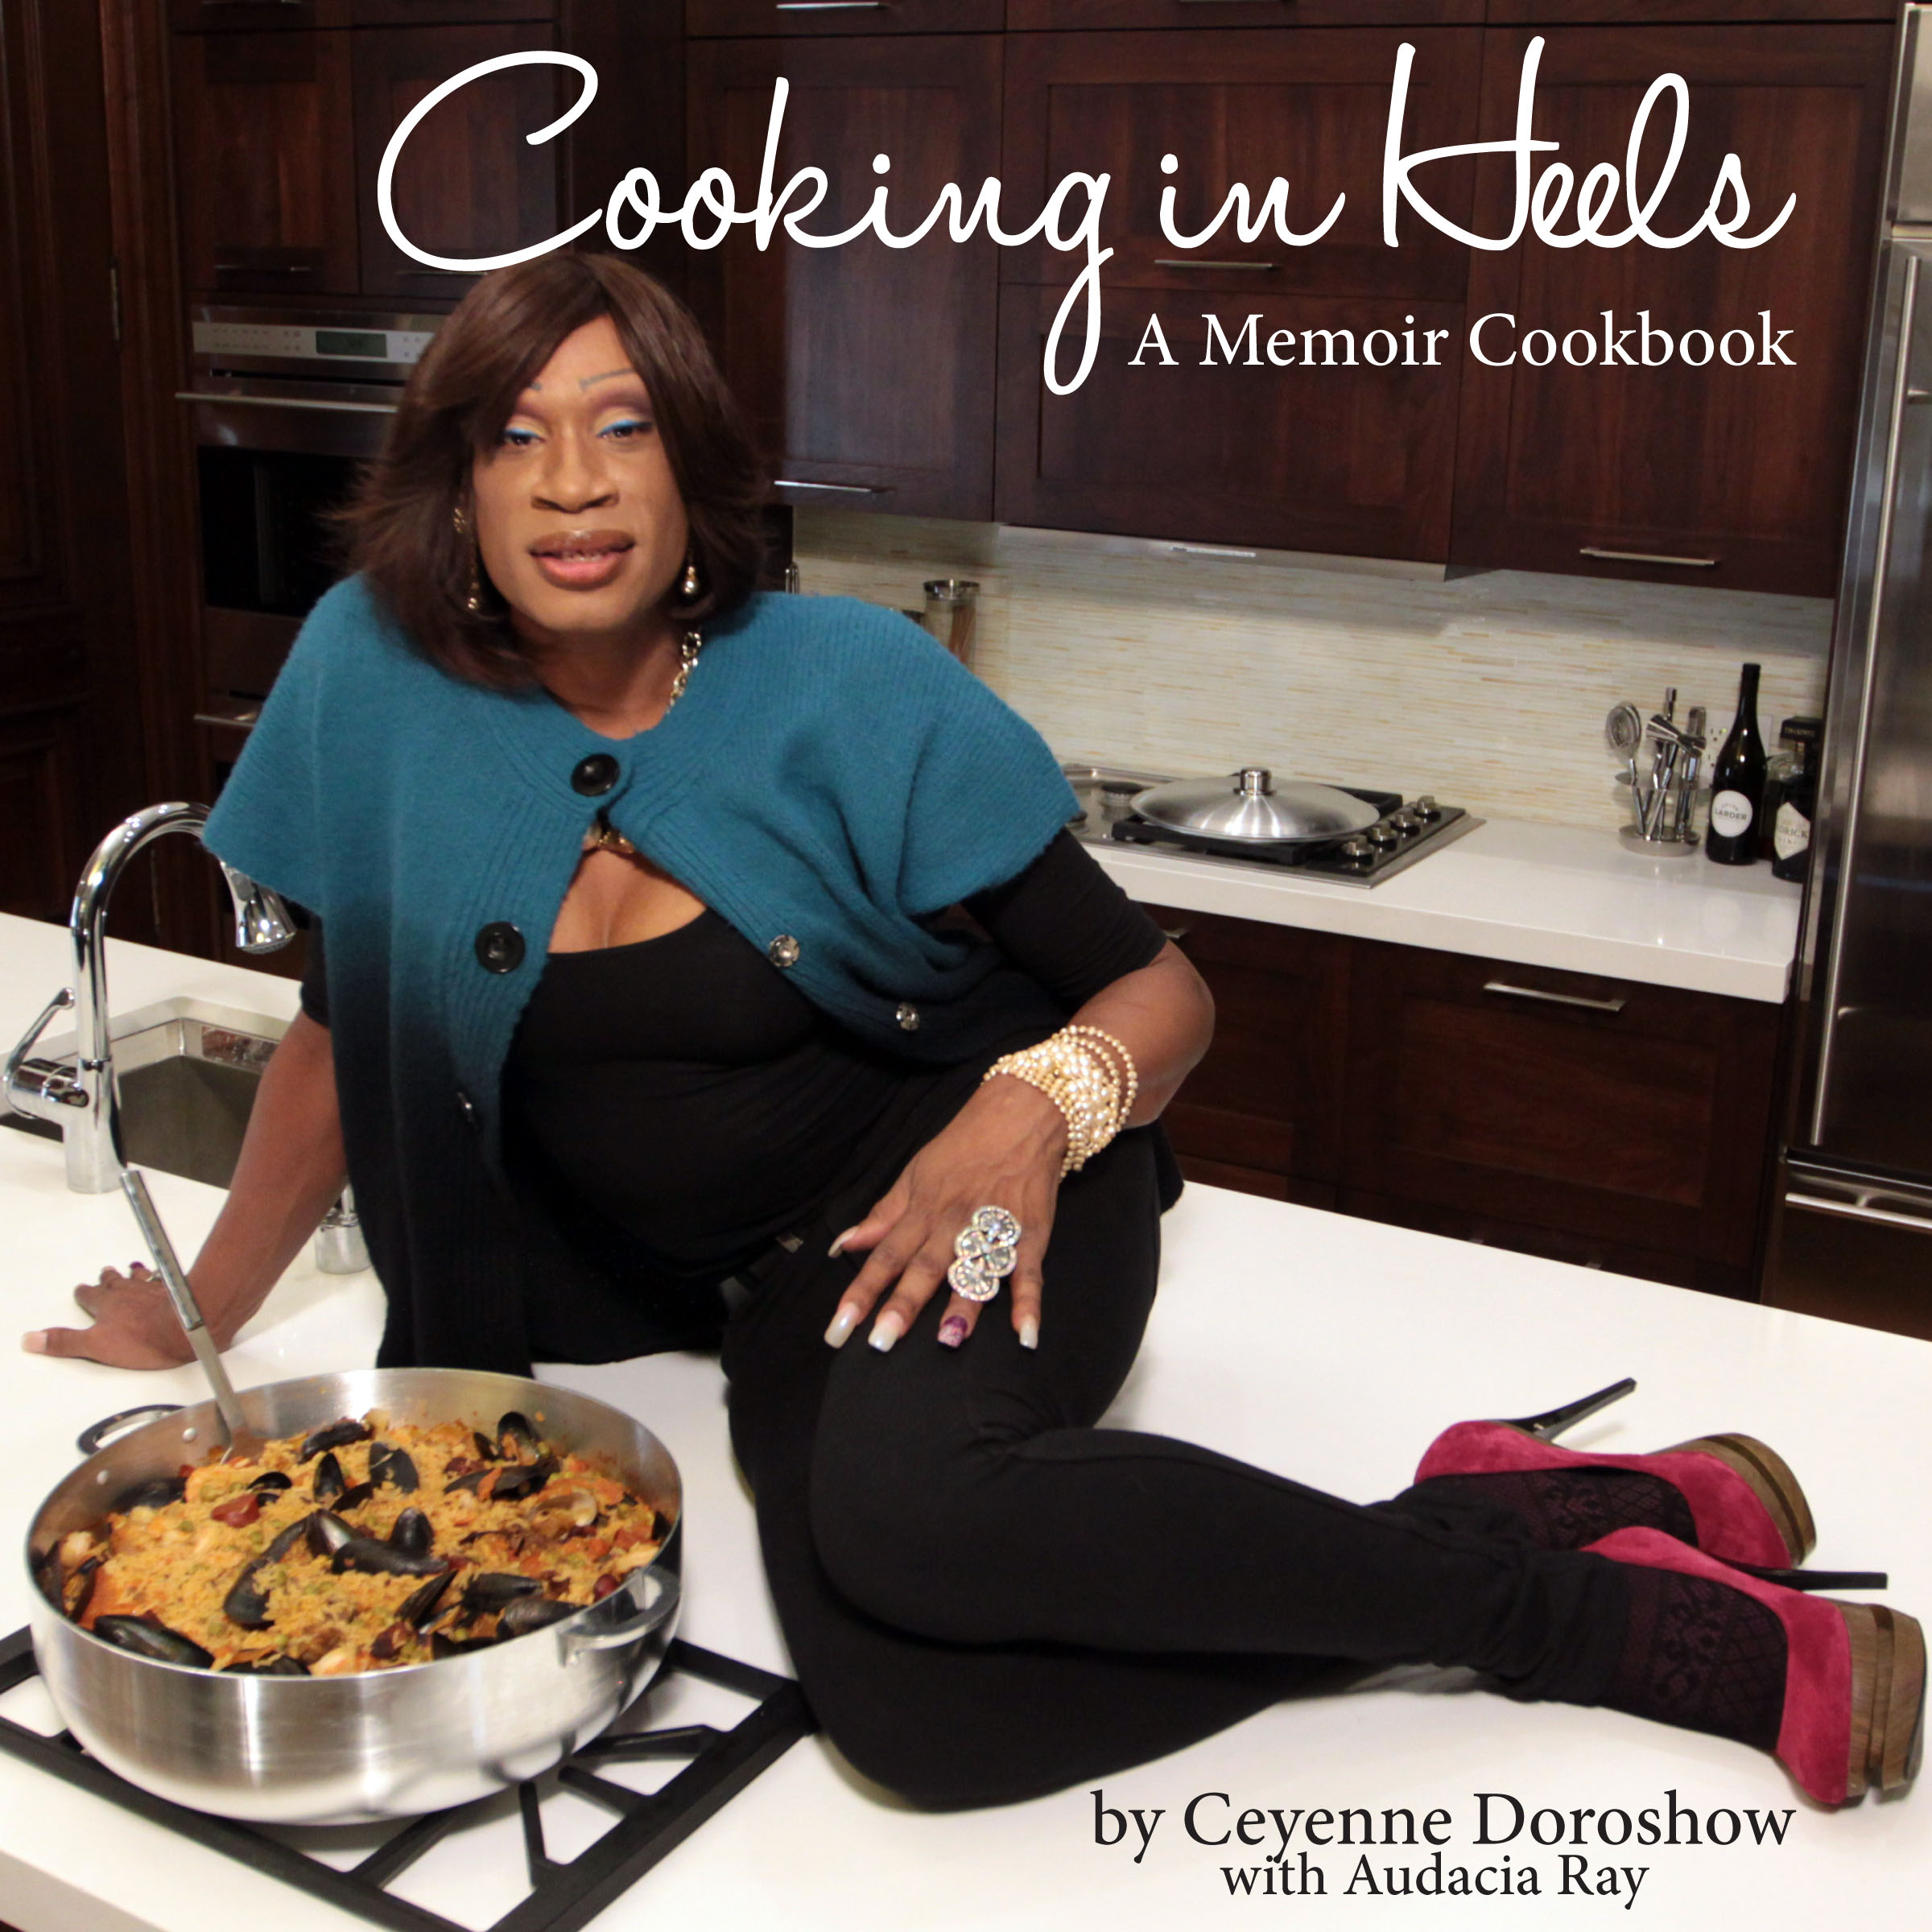 The cover of Cooking in Heels [Stacie Joy]